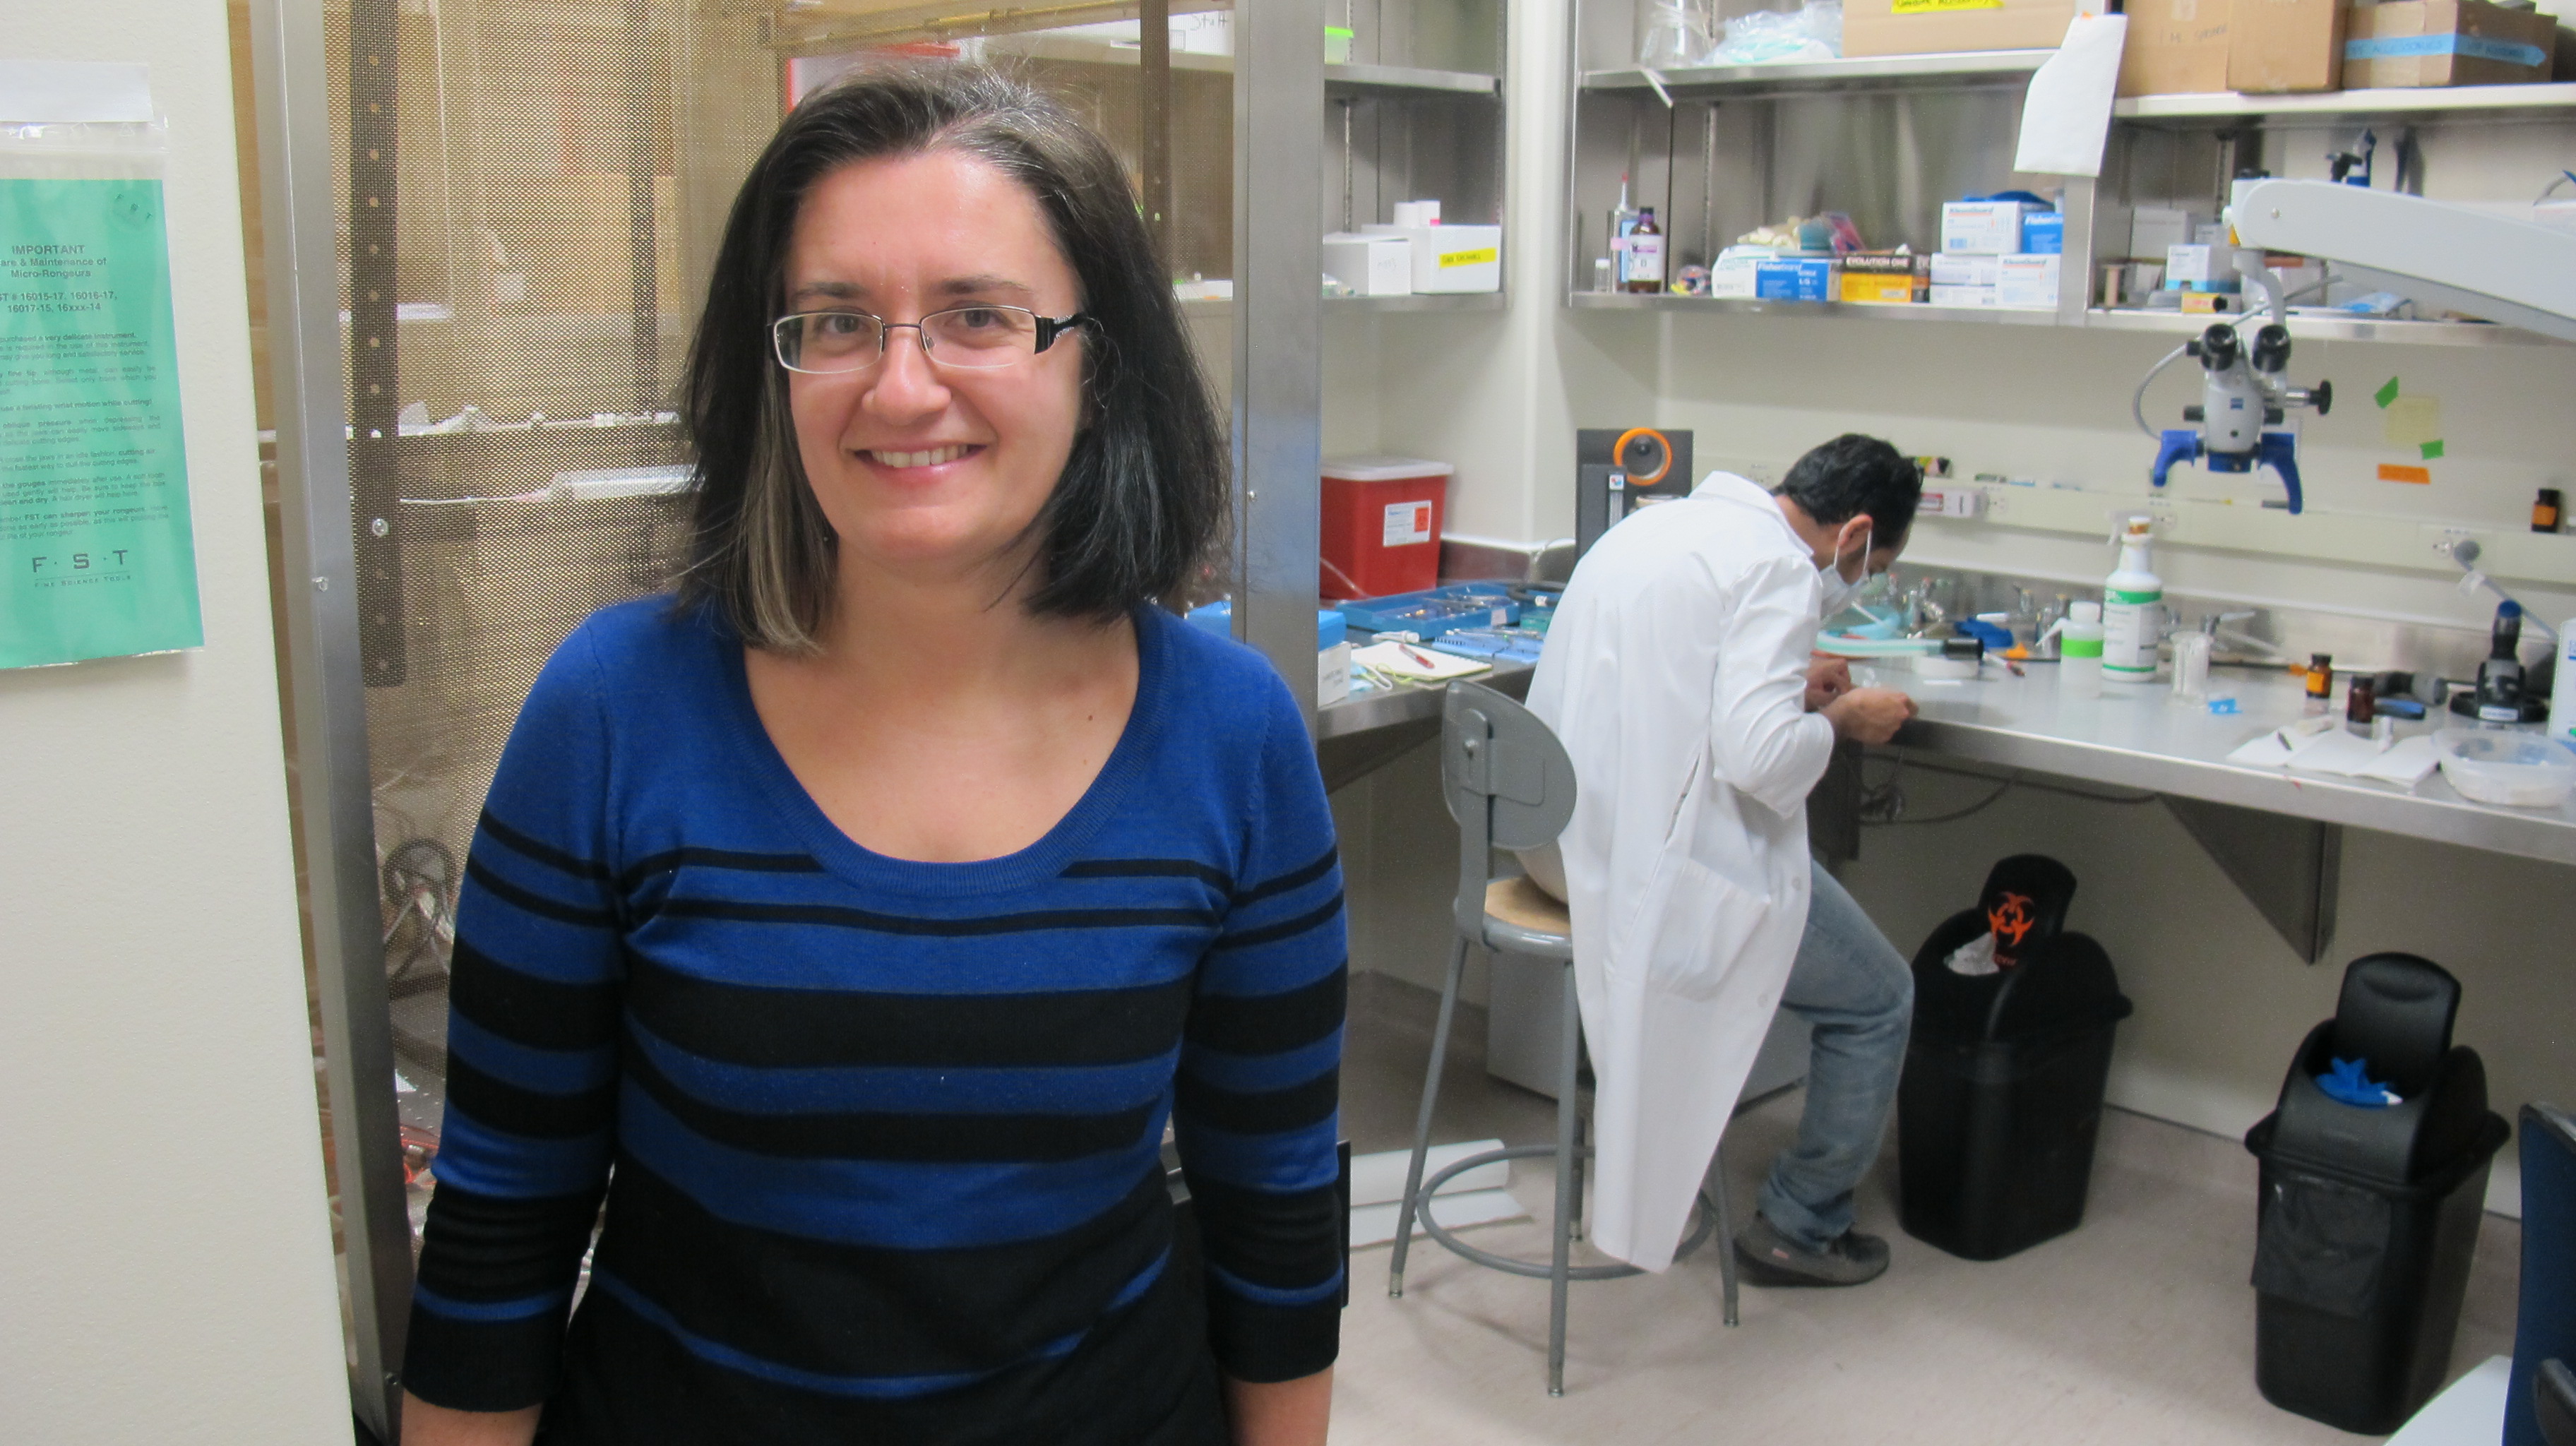 Silvia Pagliardini co-authored a paper in the journal Nature examining the science of sighing